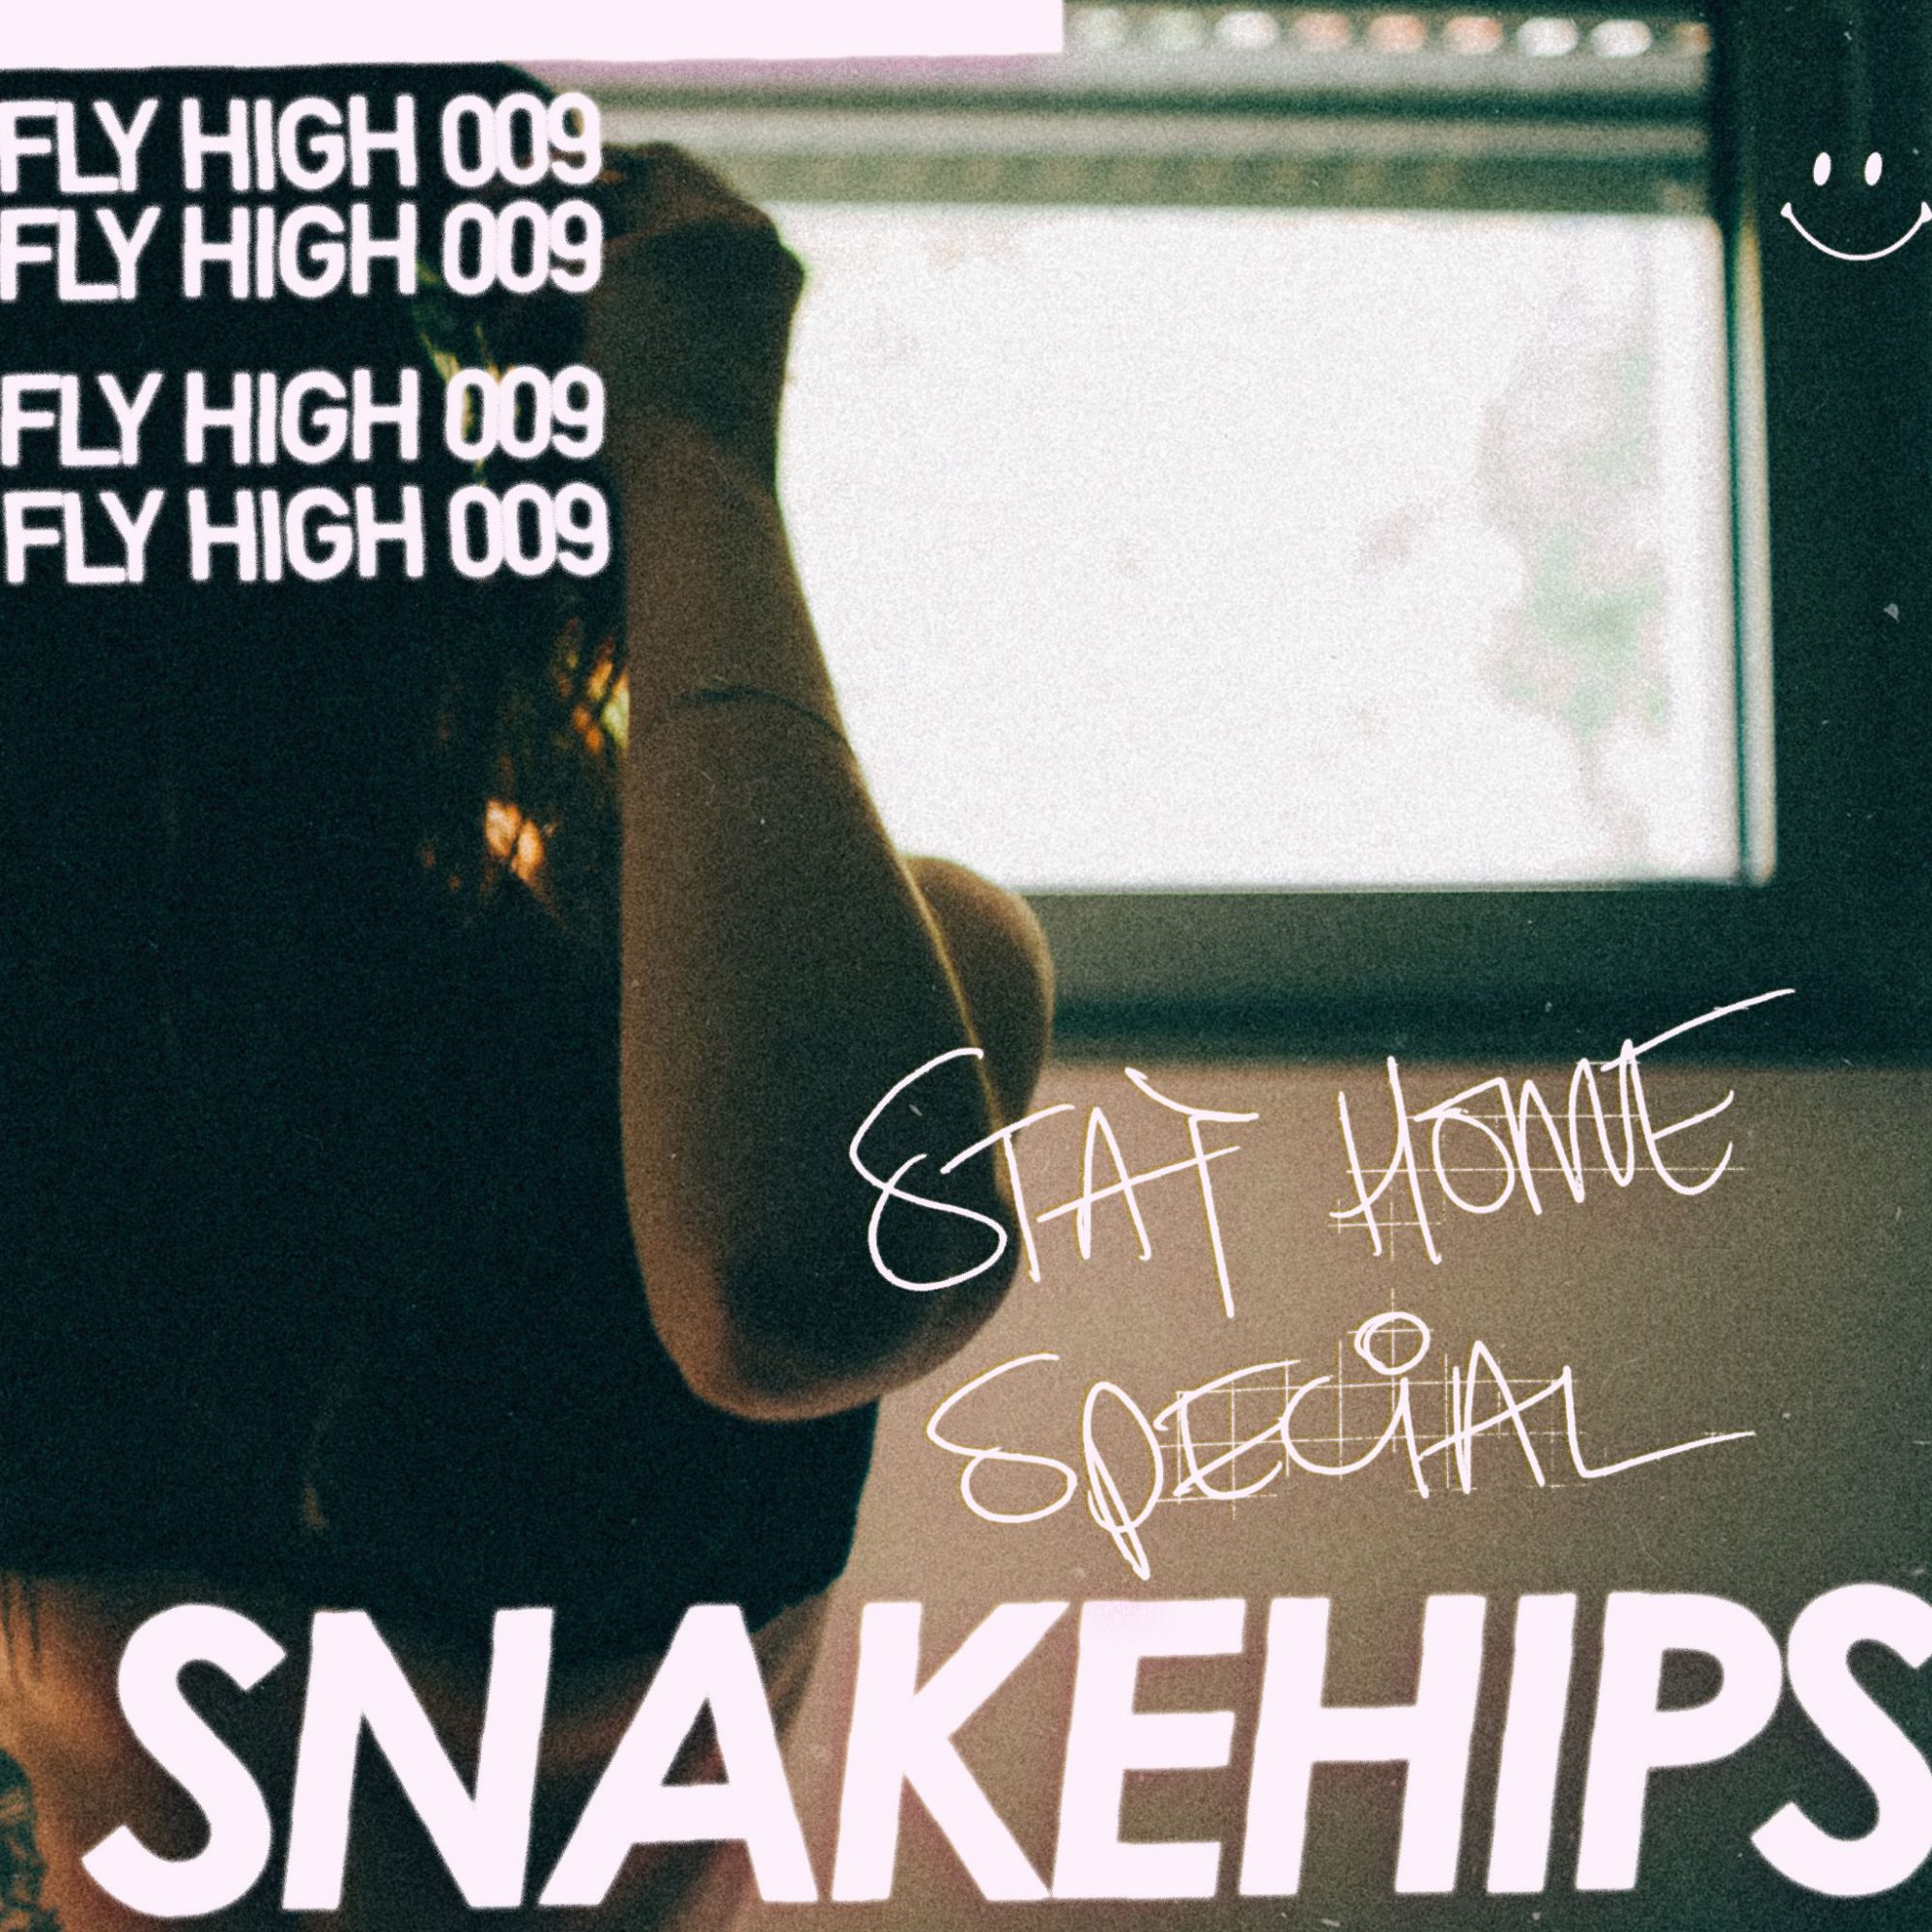 Snakehips' Fly High 009: Stay Home Special